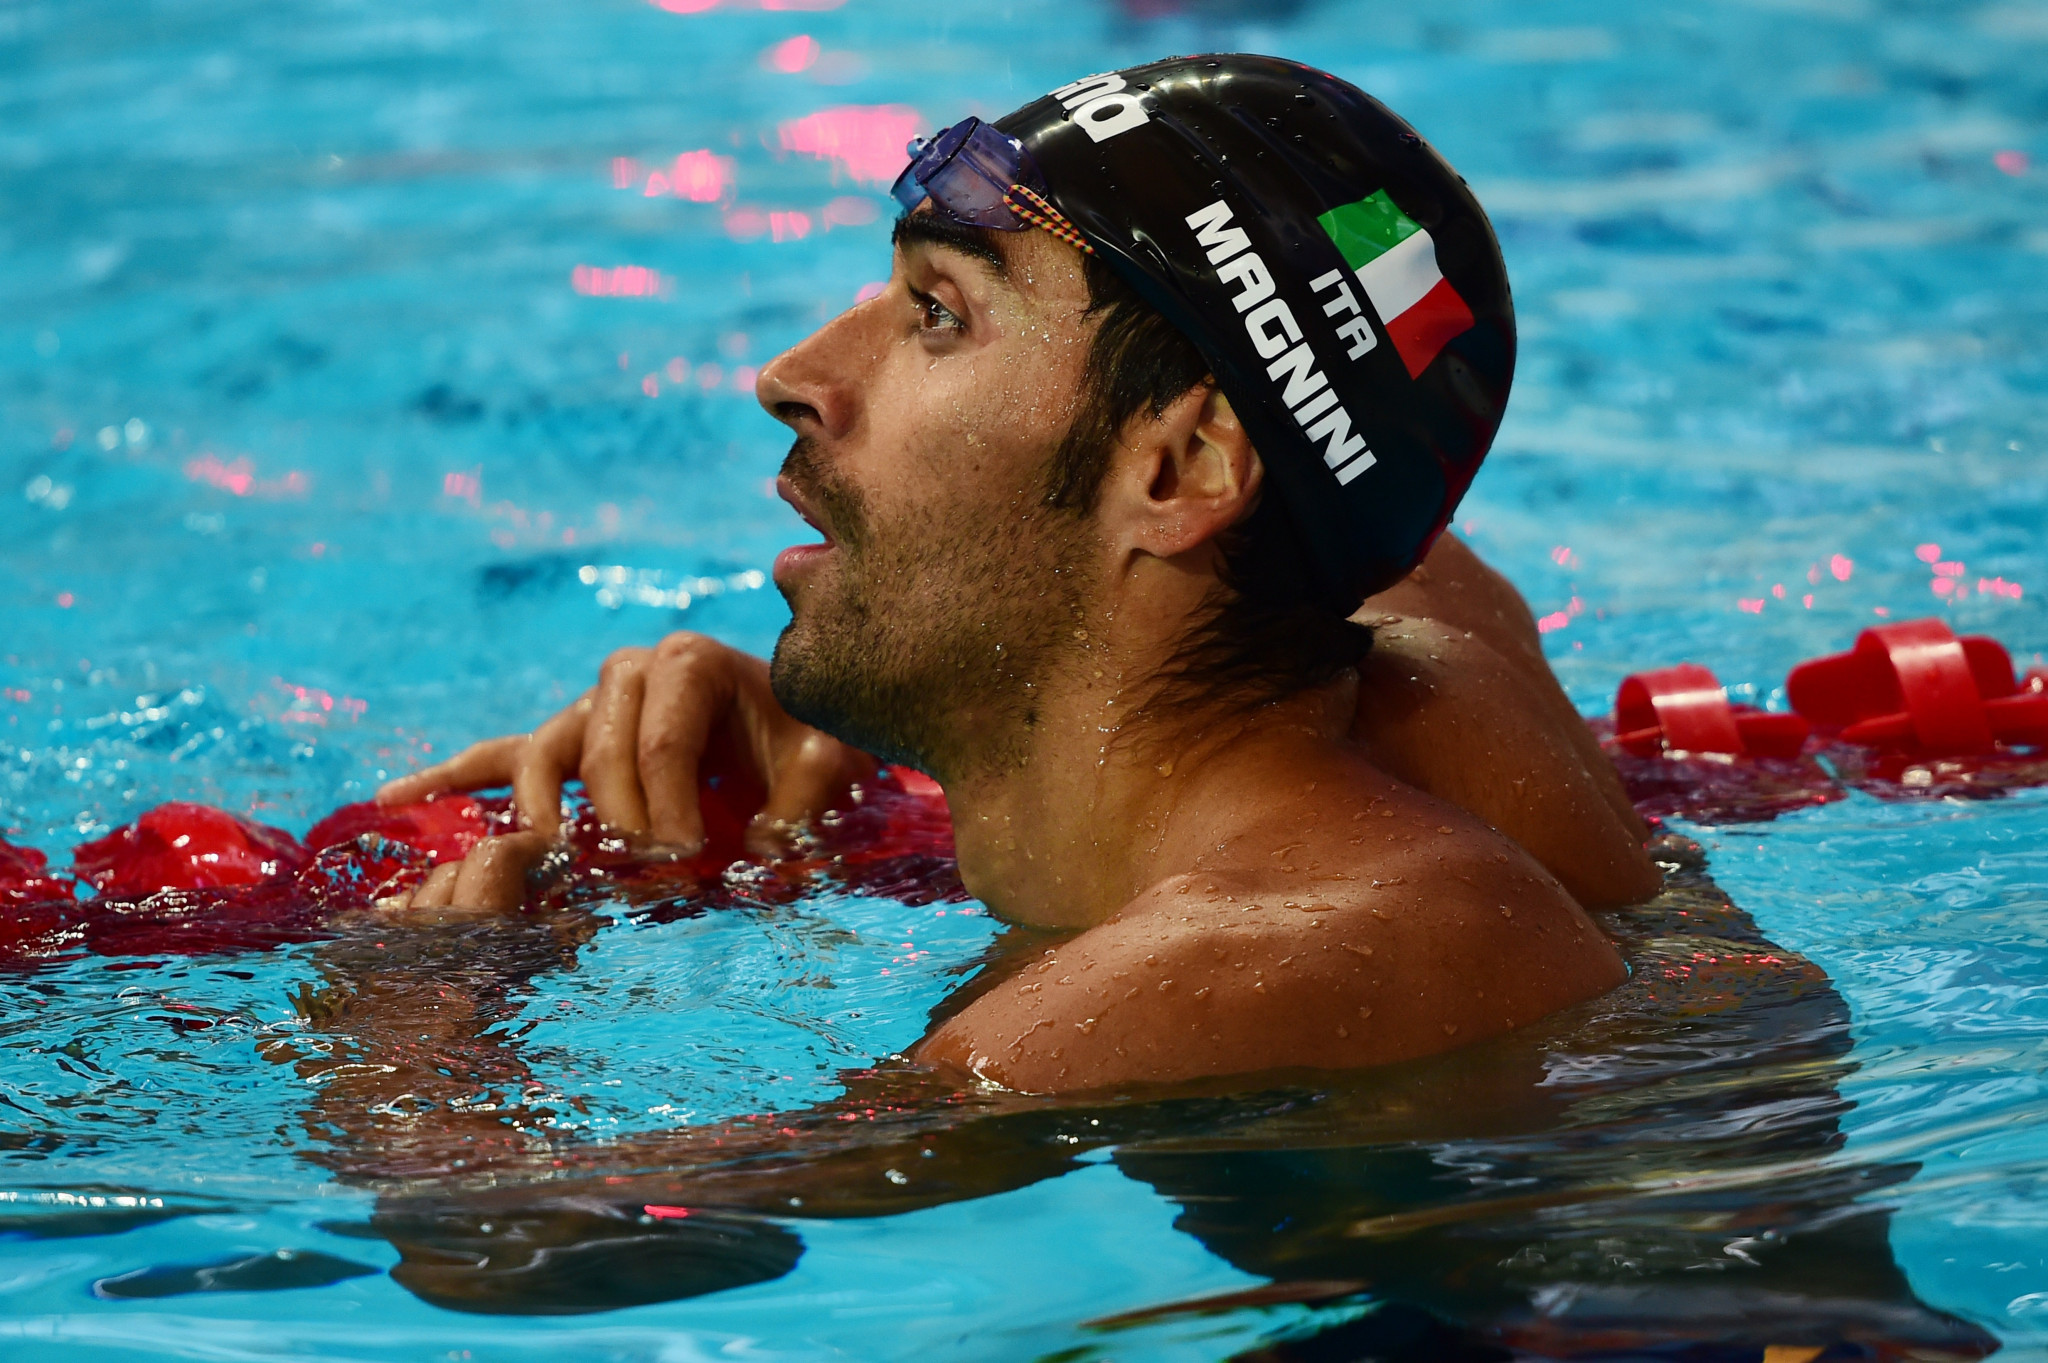 Filippo Magnini won 4x200m freestyle relay bronze at the Athens 2004 Olympic Games ©Getty Images